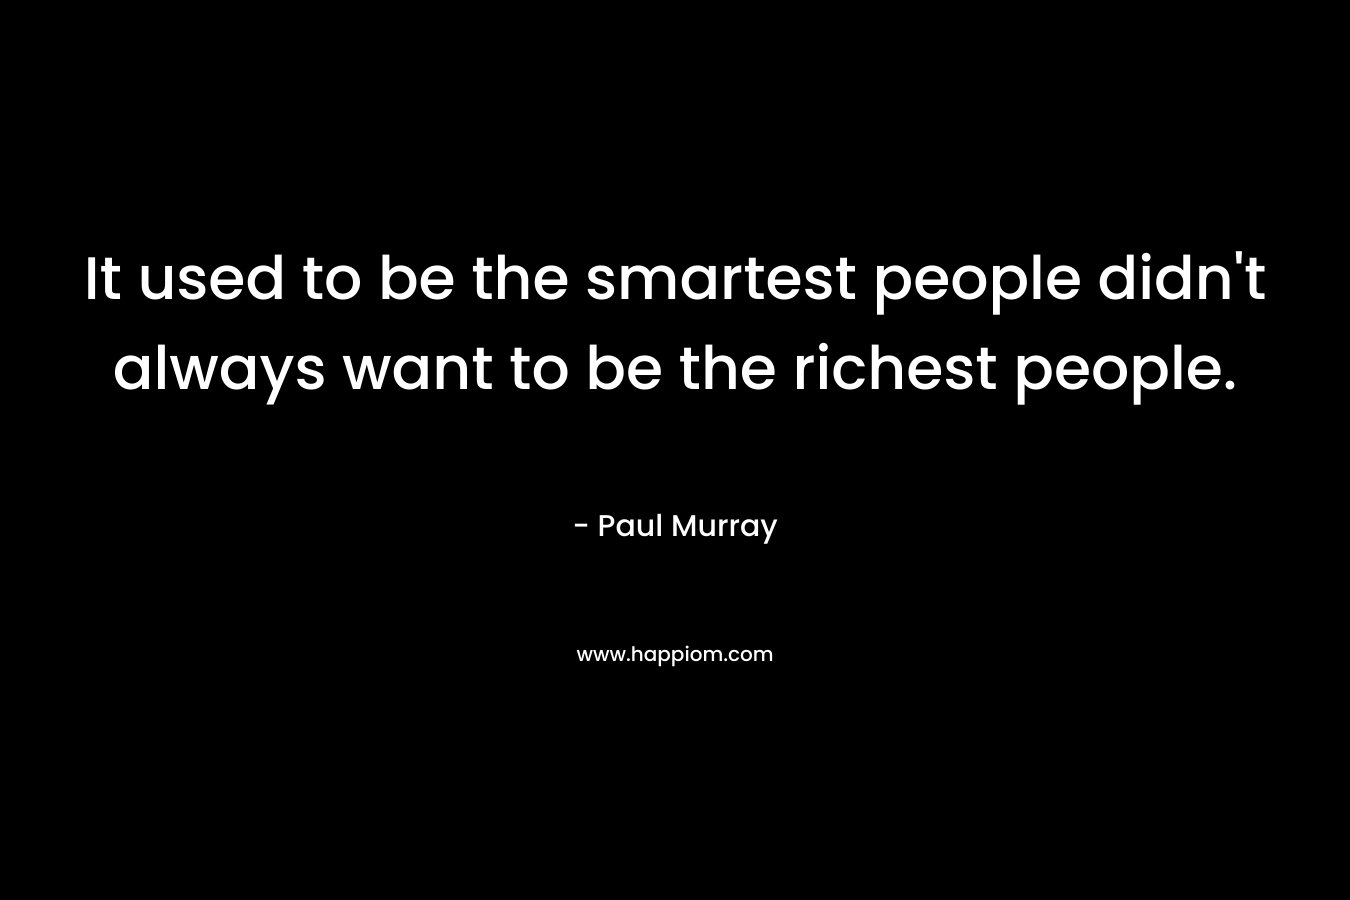 It used to be the smartest people didn’t always want to be the richest people. – Paul Murray